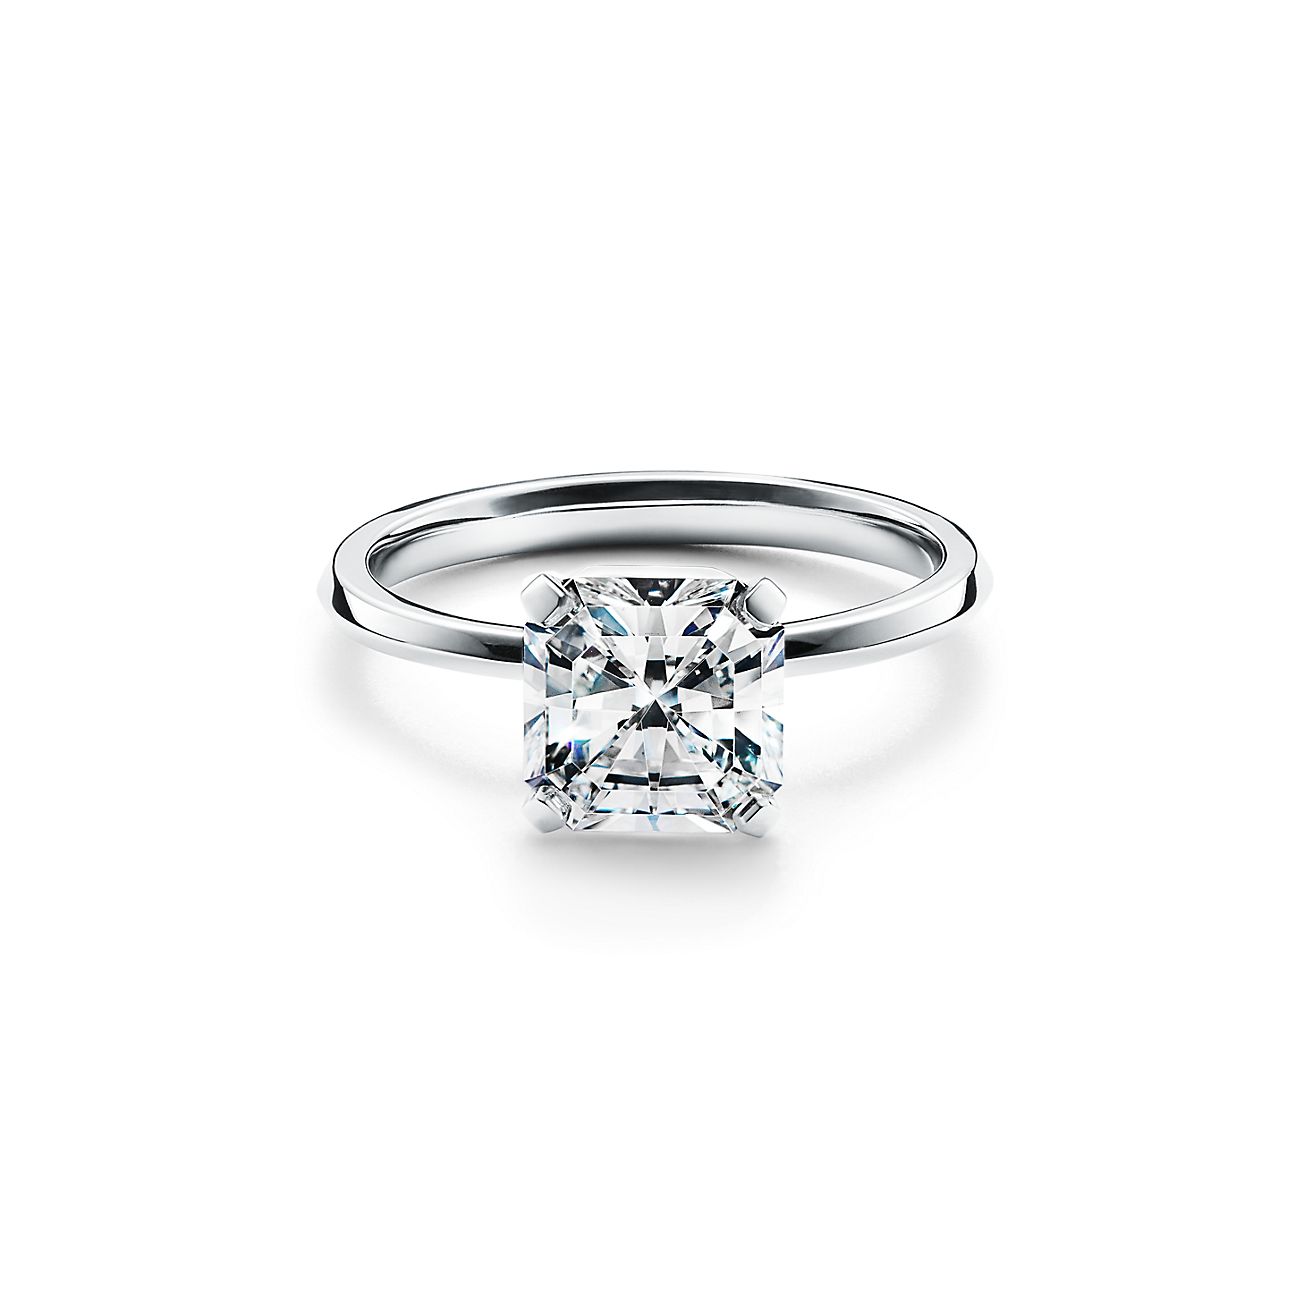 Tiffany True™ engagement ring in platinum: an icon of modern love 